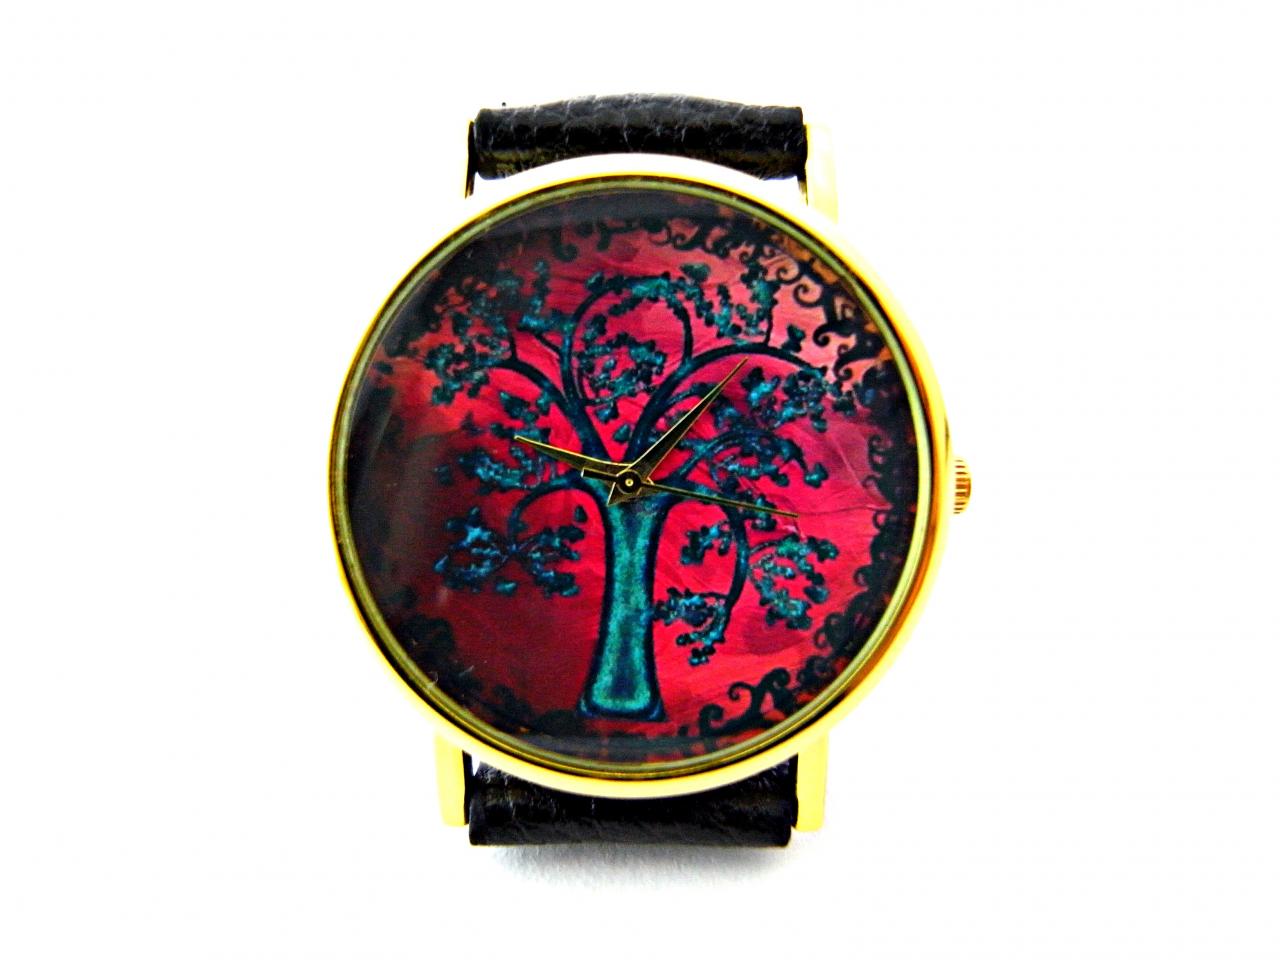 Tree Leather Wrist Watches, Woman Man Lady Unisex Watch, Genuine Leather Handmade Unique Watch #5